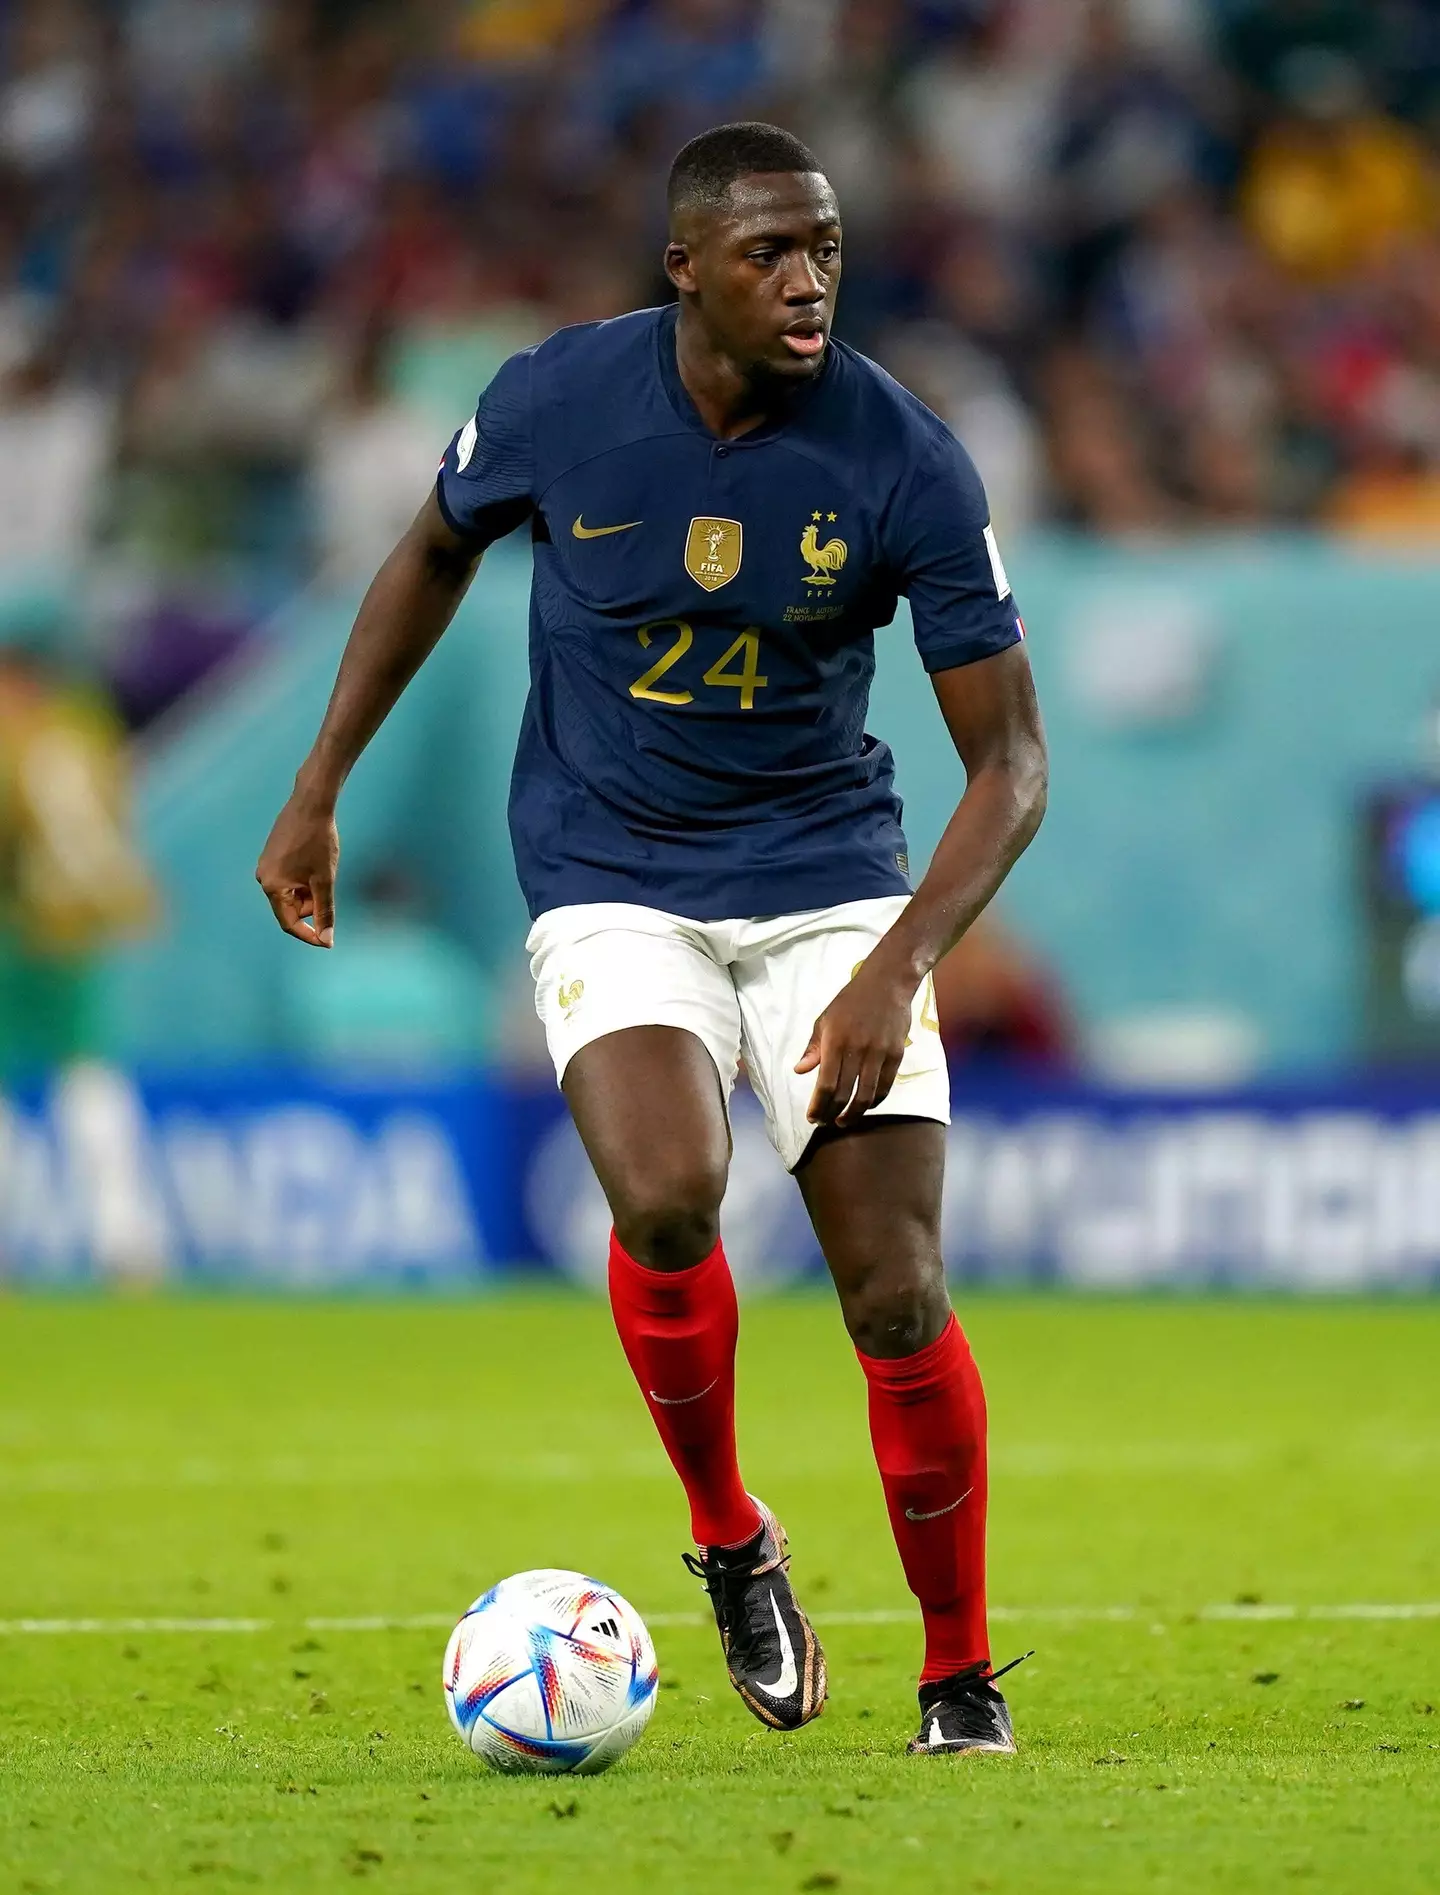 Konate started for France in their opening game of the World Cup (Image: Alamy)